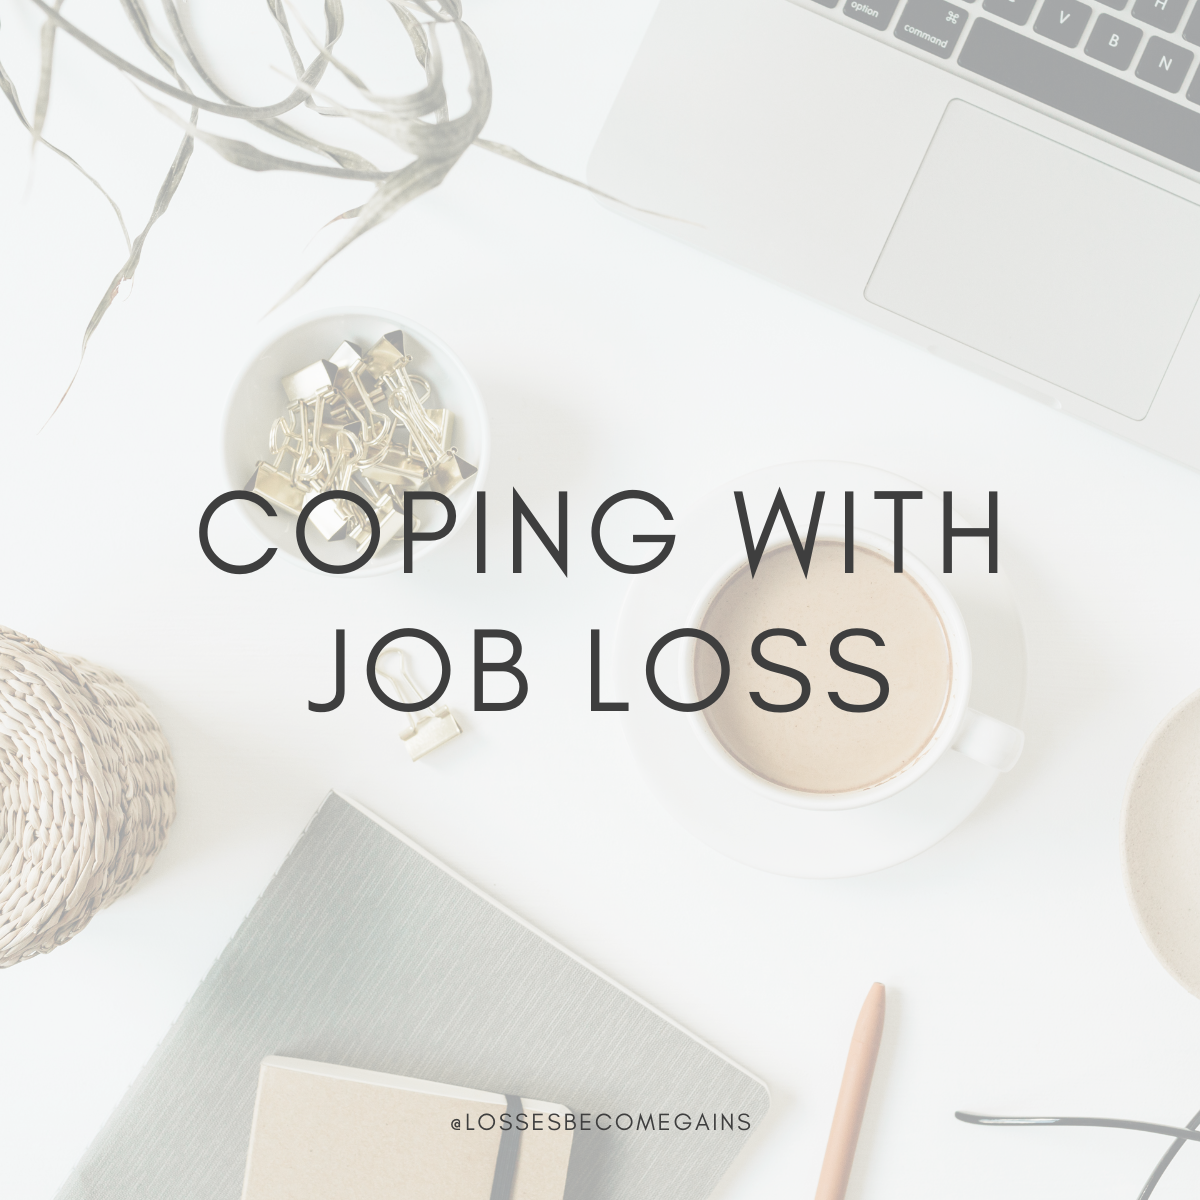 Coping with job loss text overlay on top of work setting